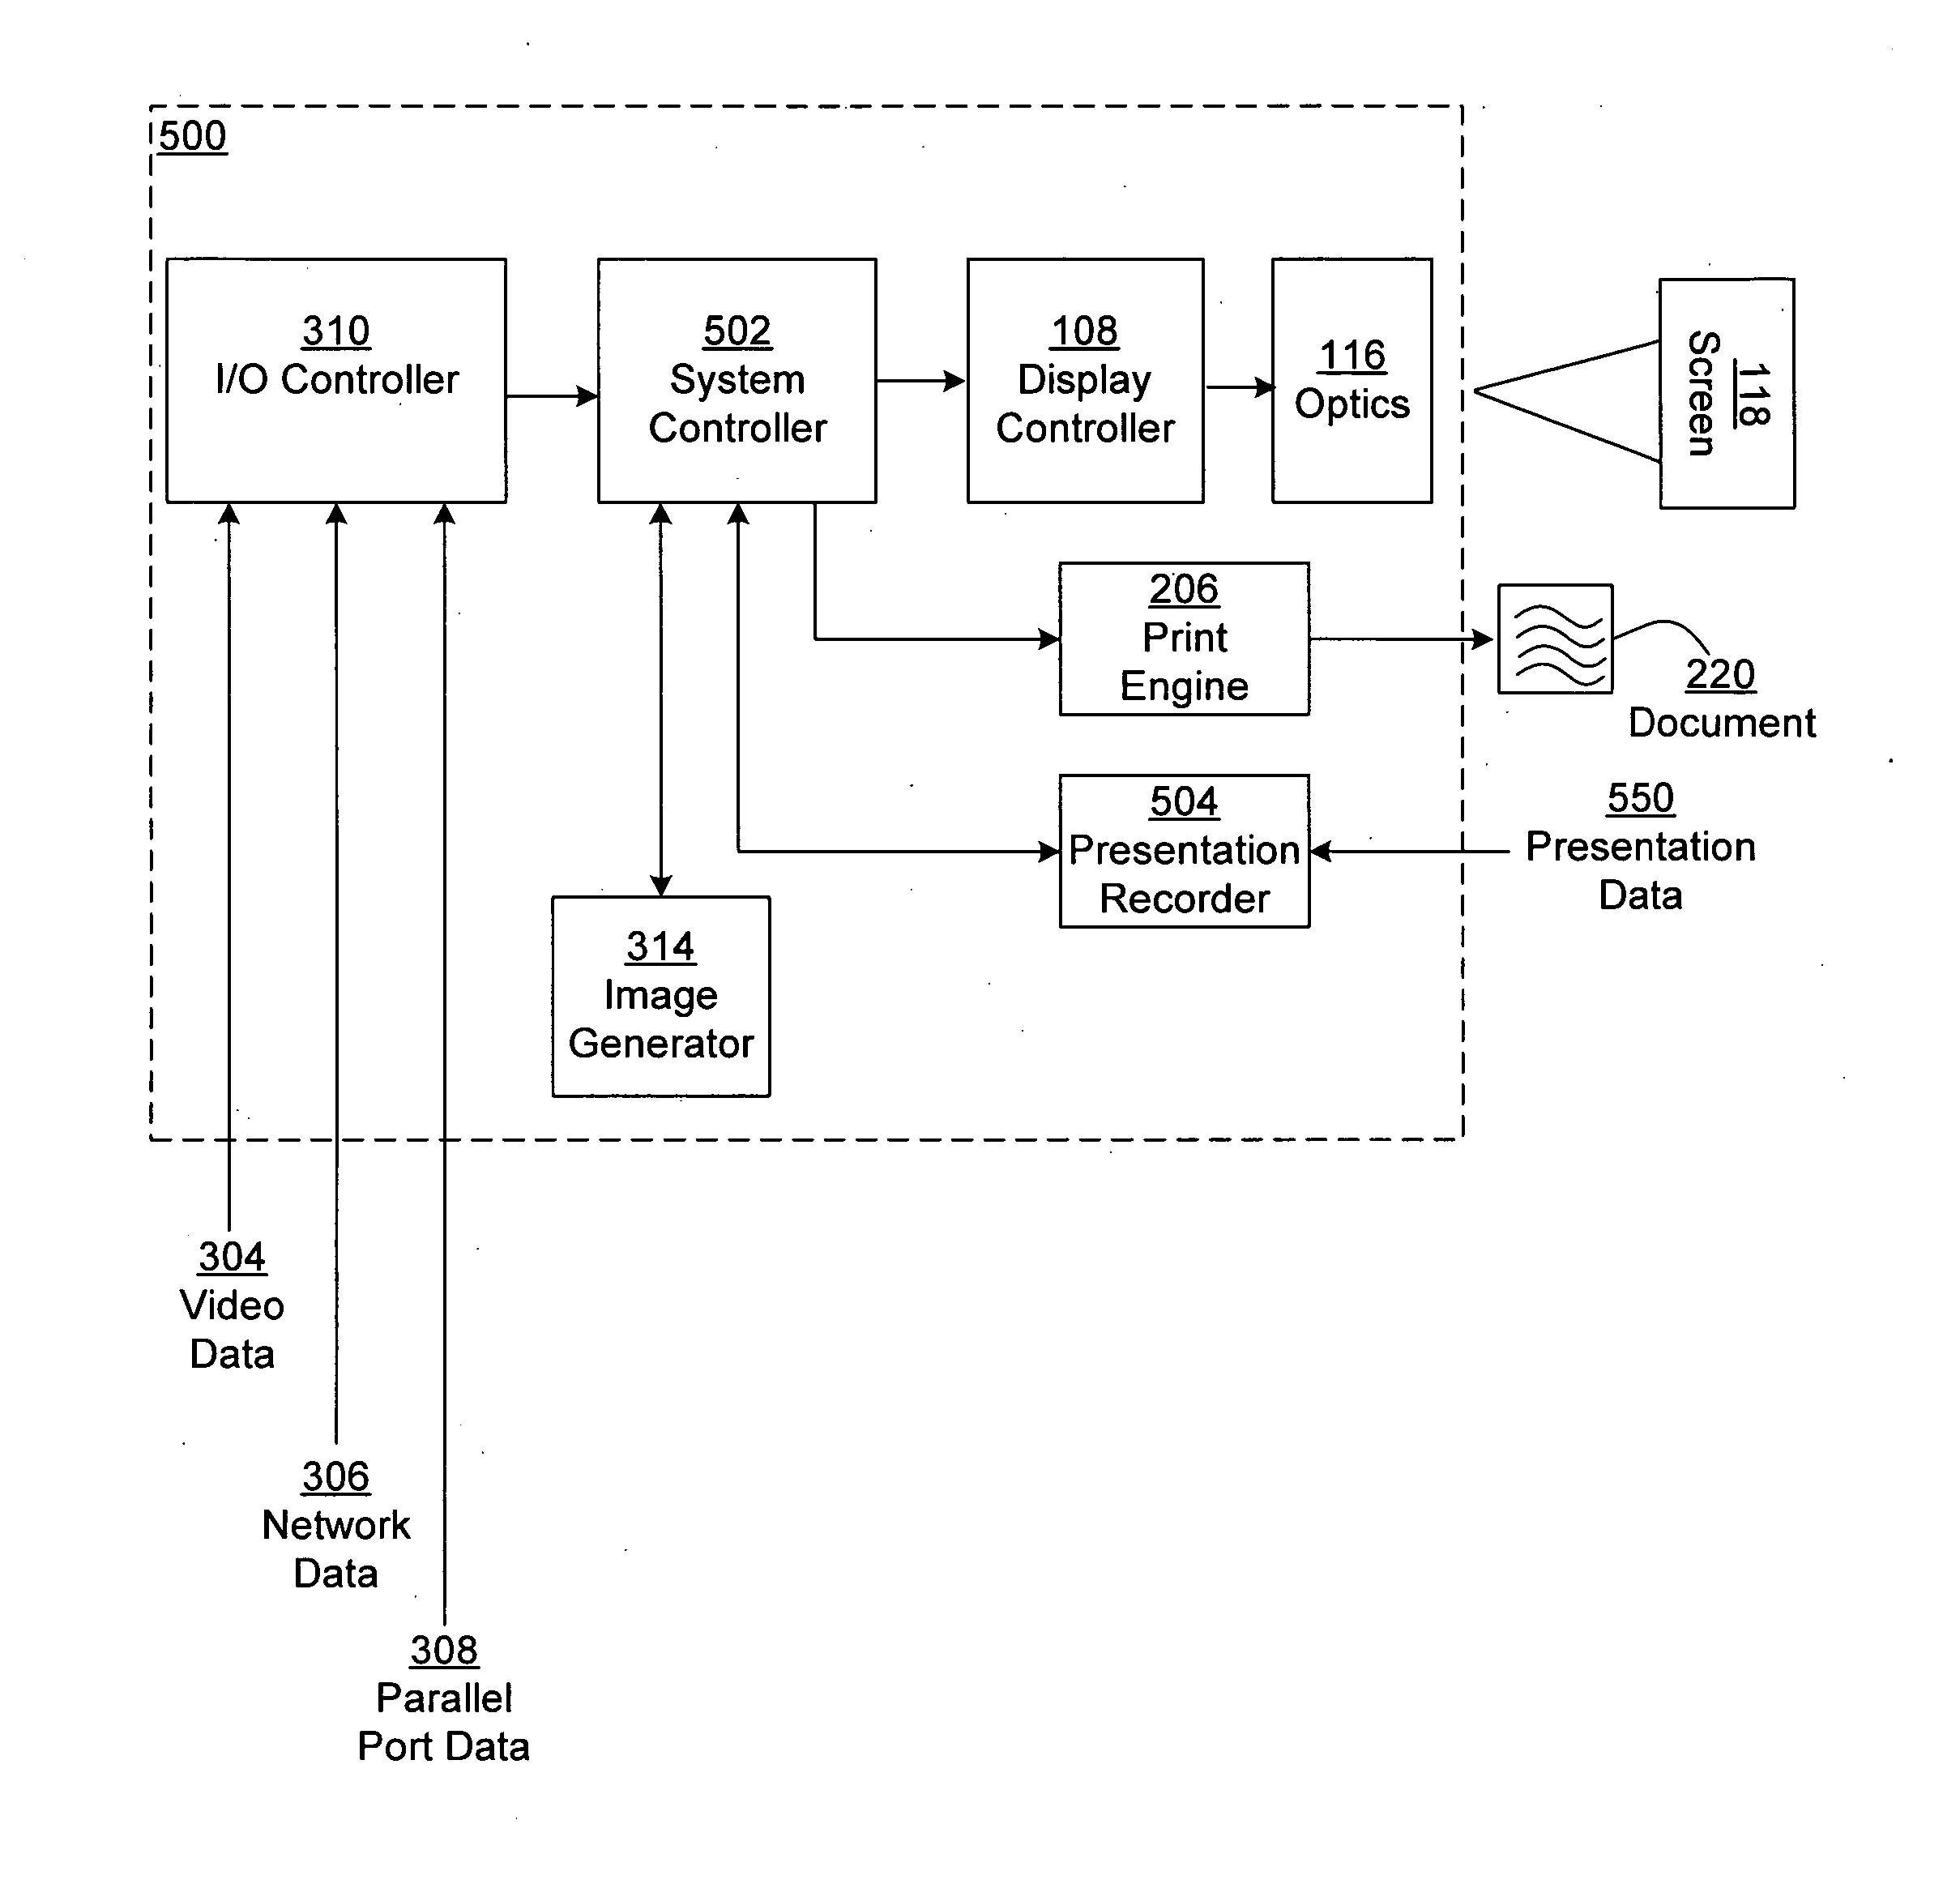 Projector/printer for displaying or printing of documents